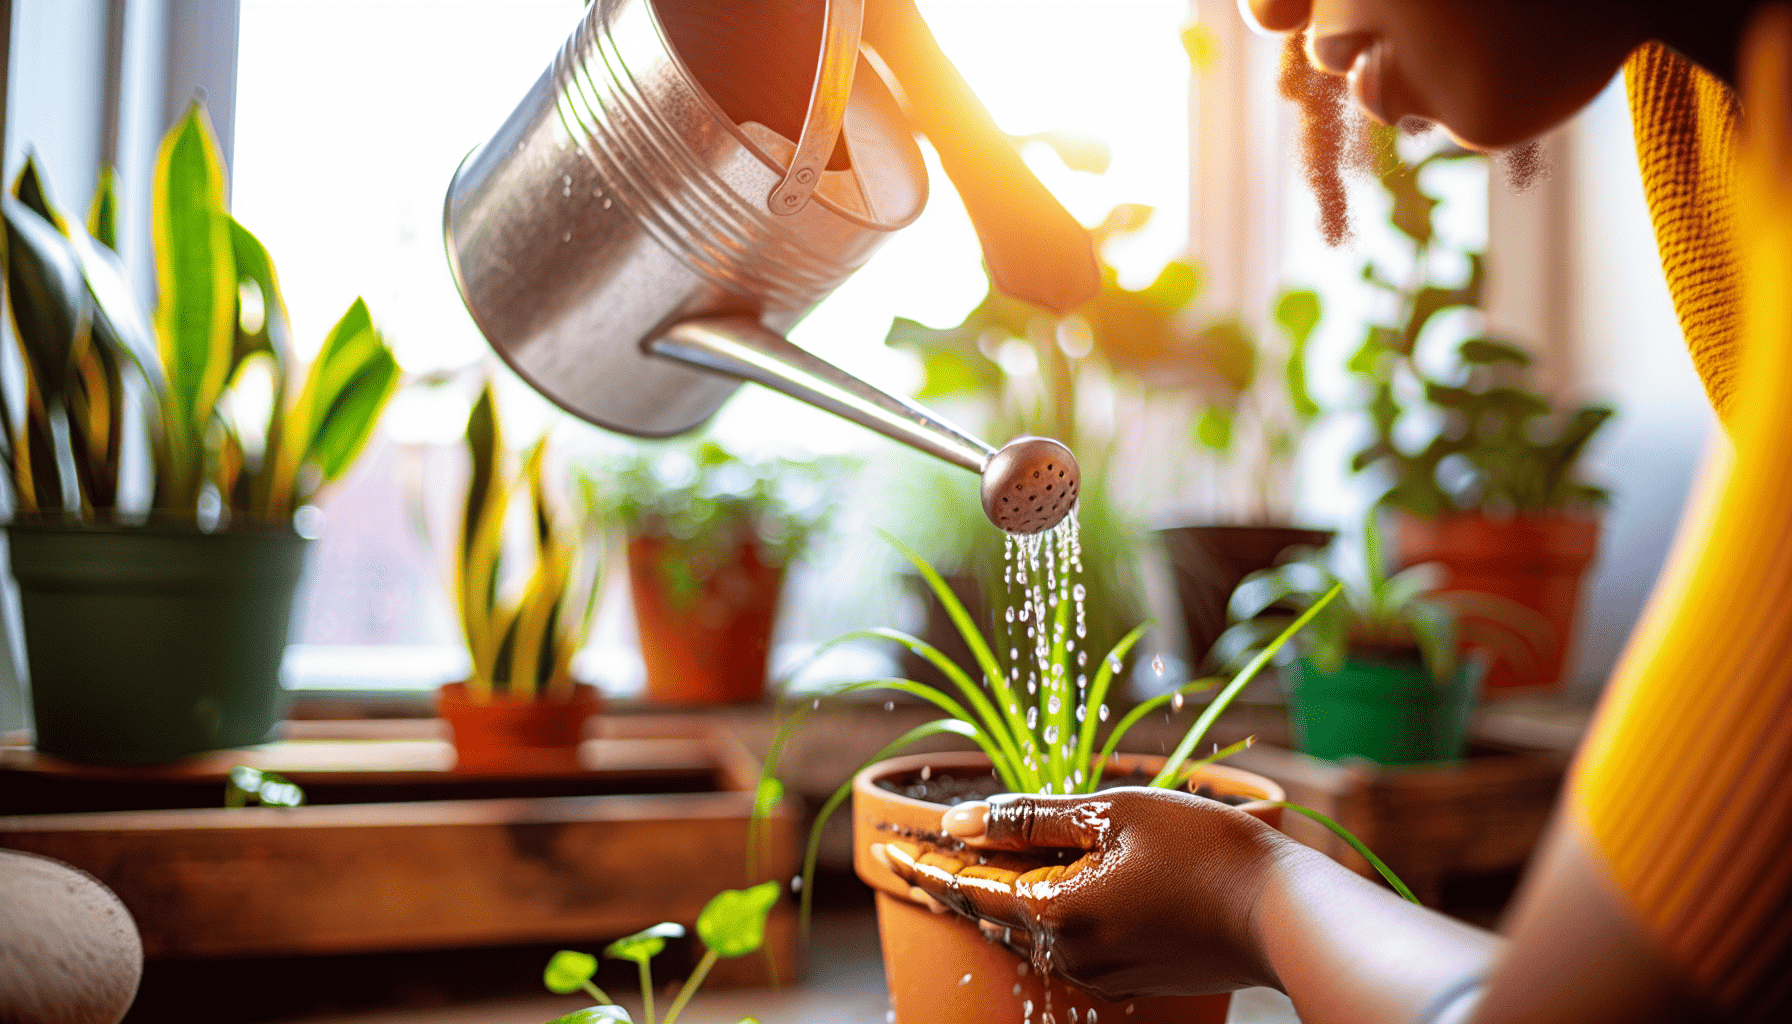 Proper watering techniques for container gardening.